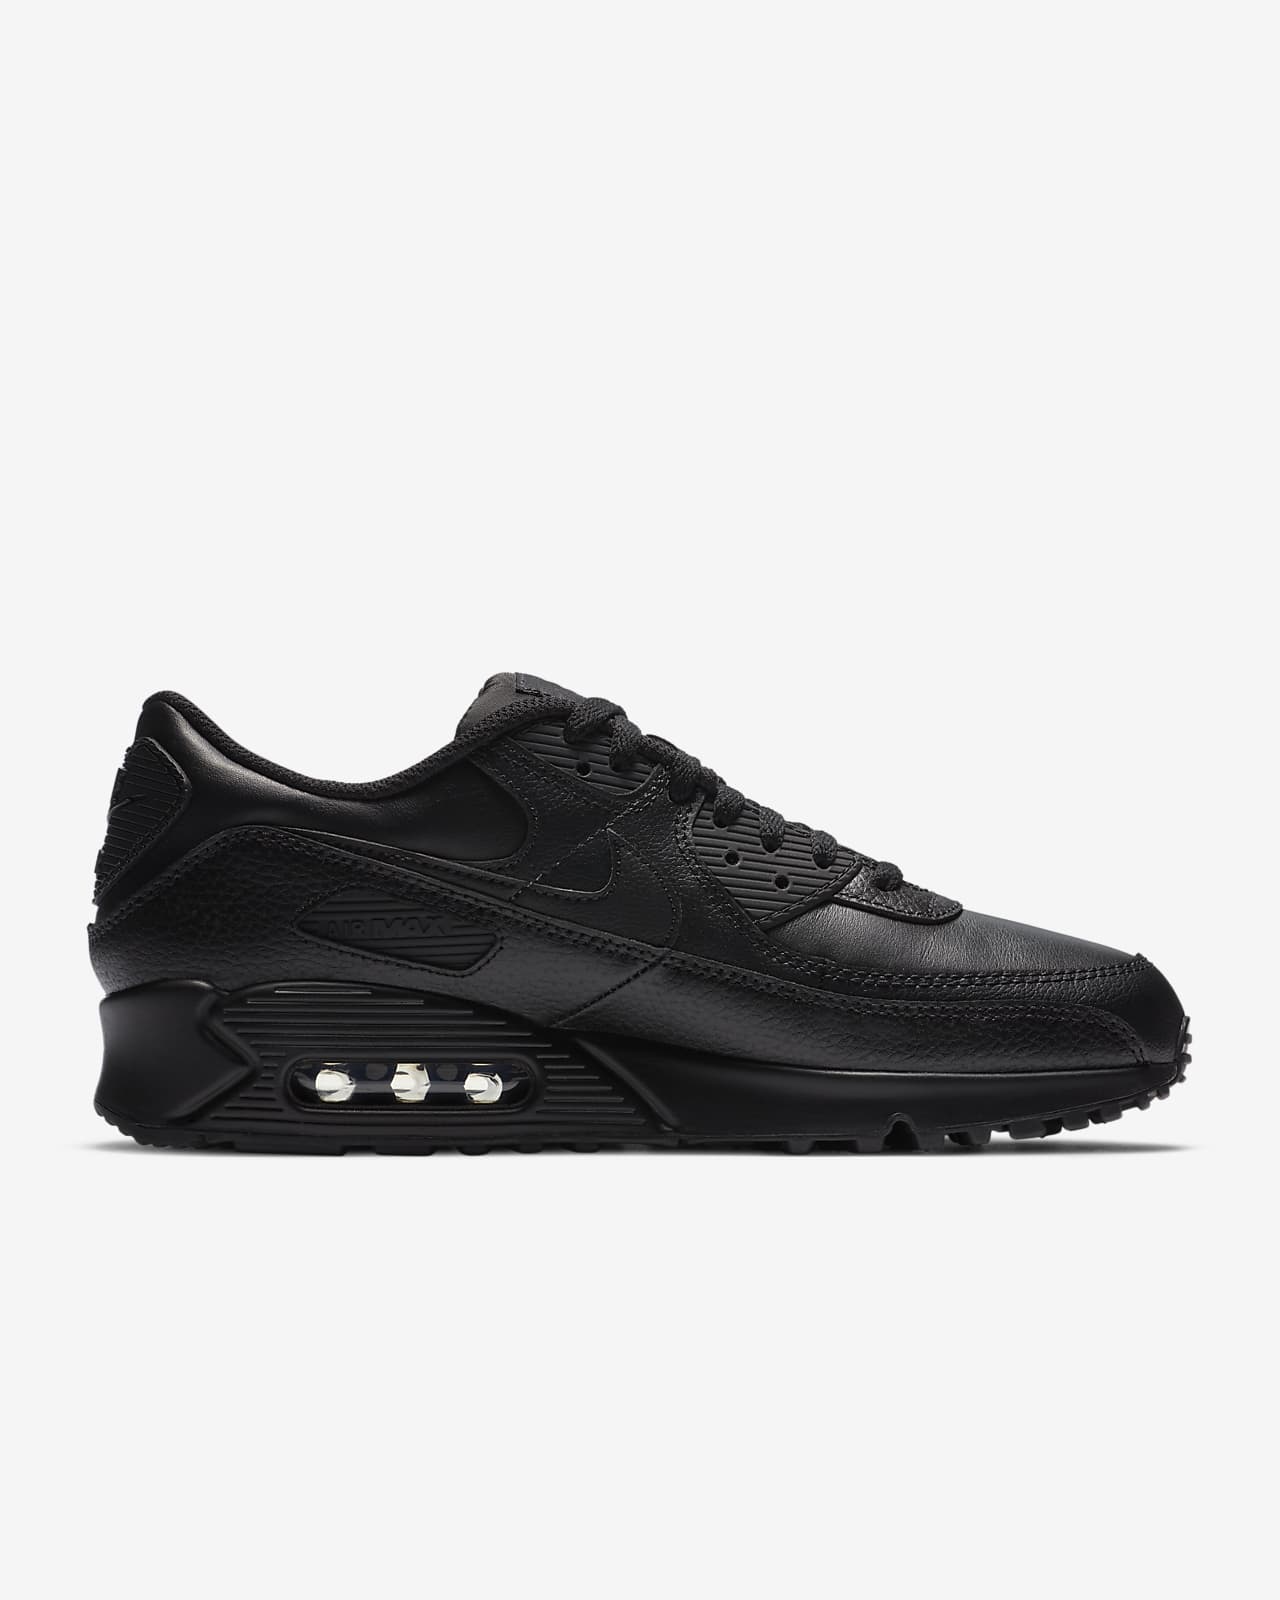 Air Max 90 LTR Men's Shoes. Nike ID